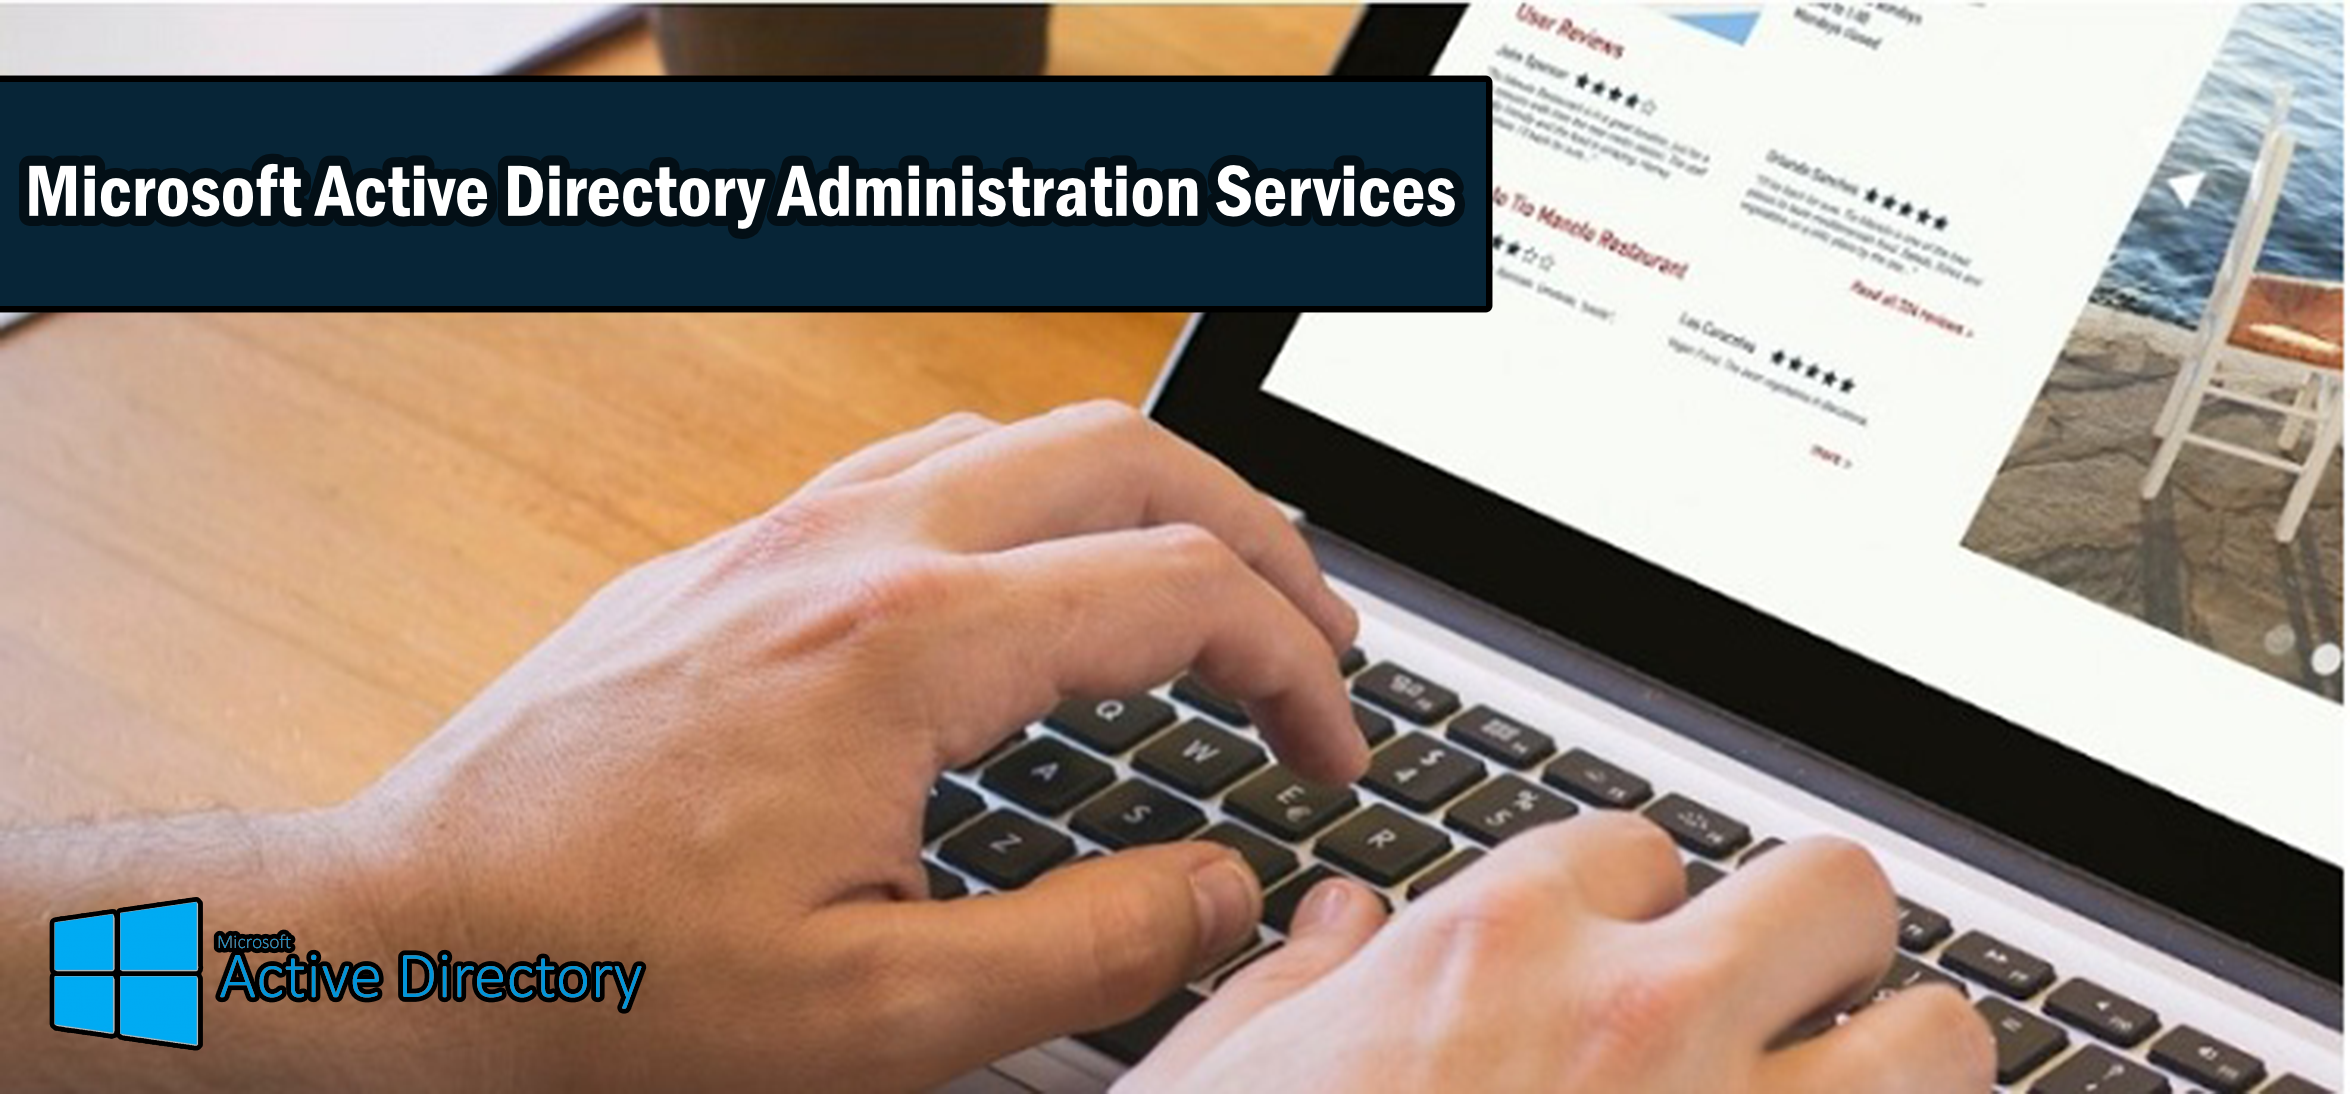 Microsoft Active Directory Administration Services in Dulzura CA, 91917